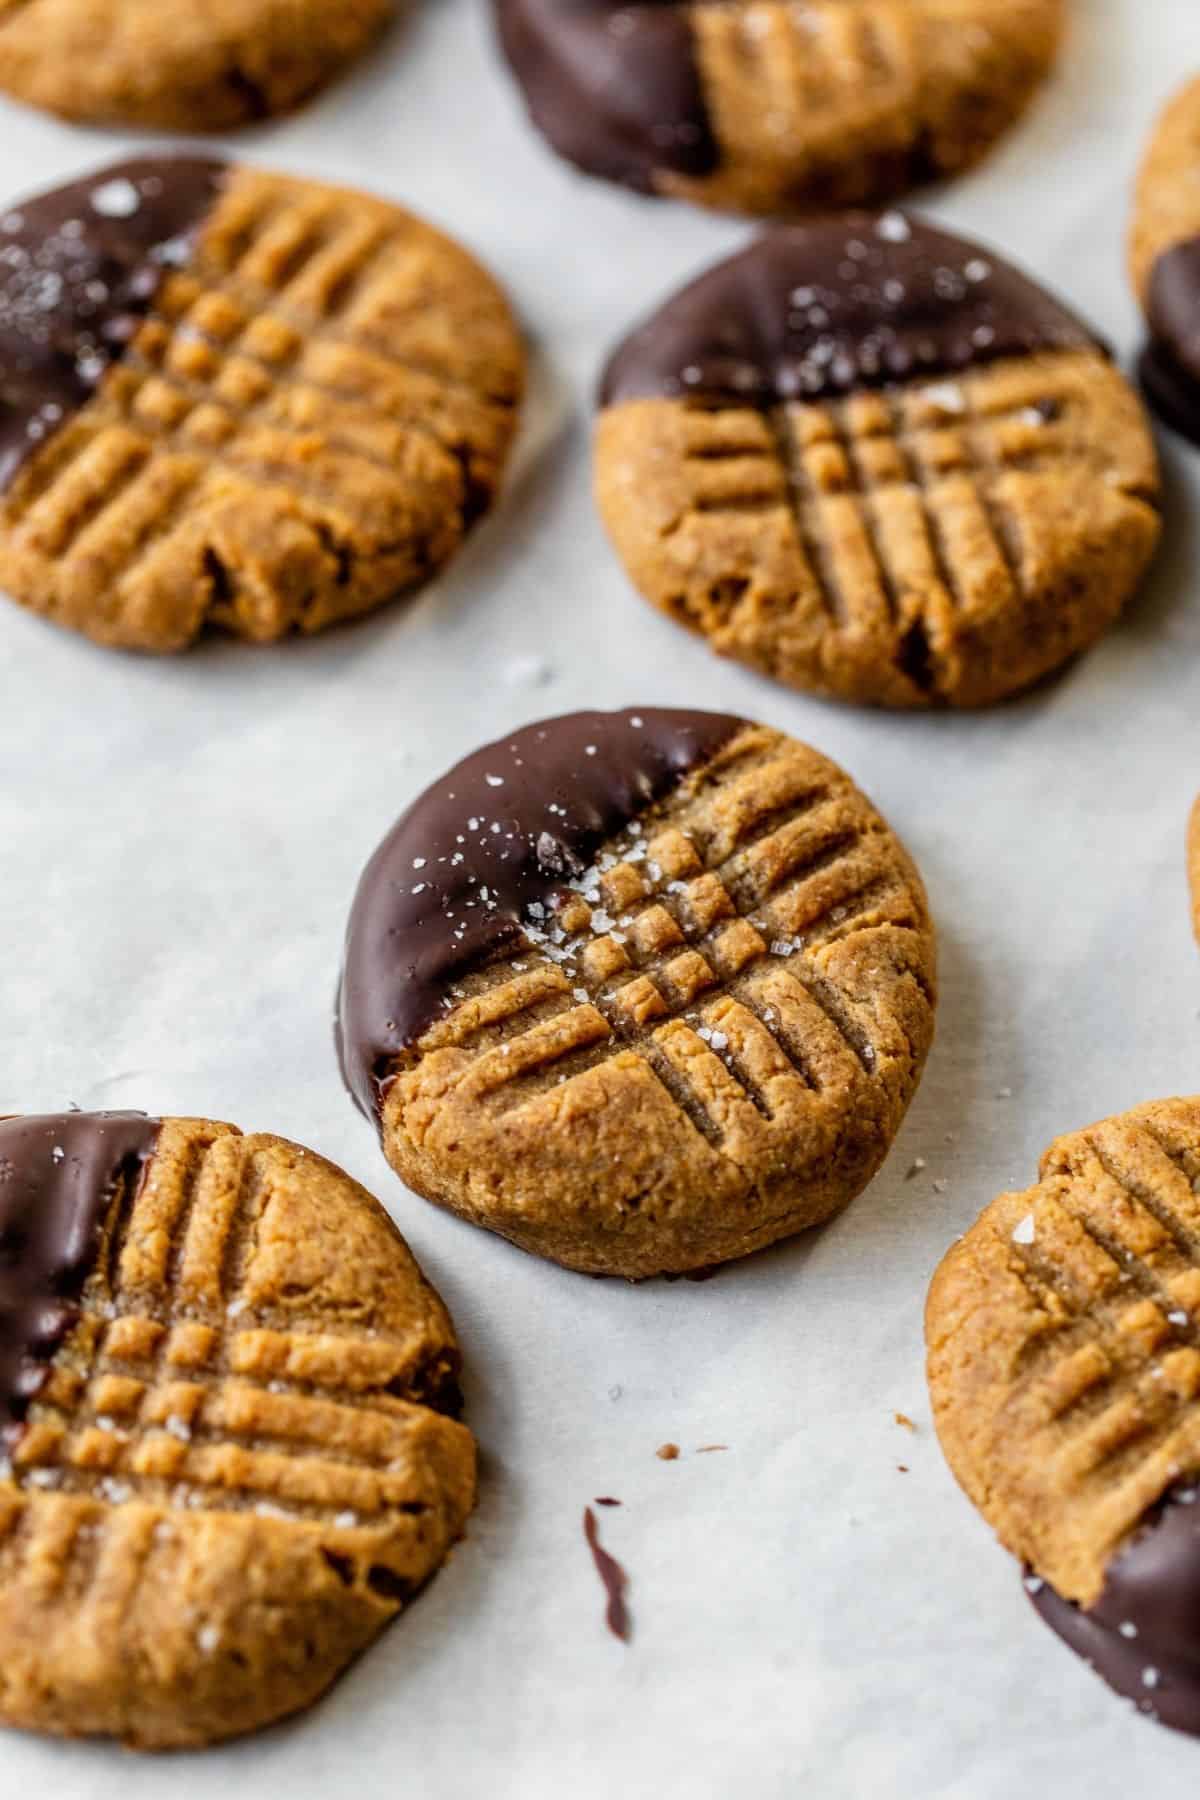 peanut butter cookies dipped in chocolate and sprinkled with sea salt